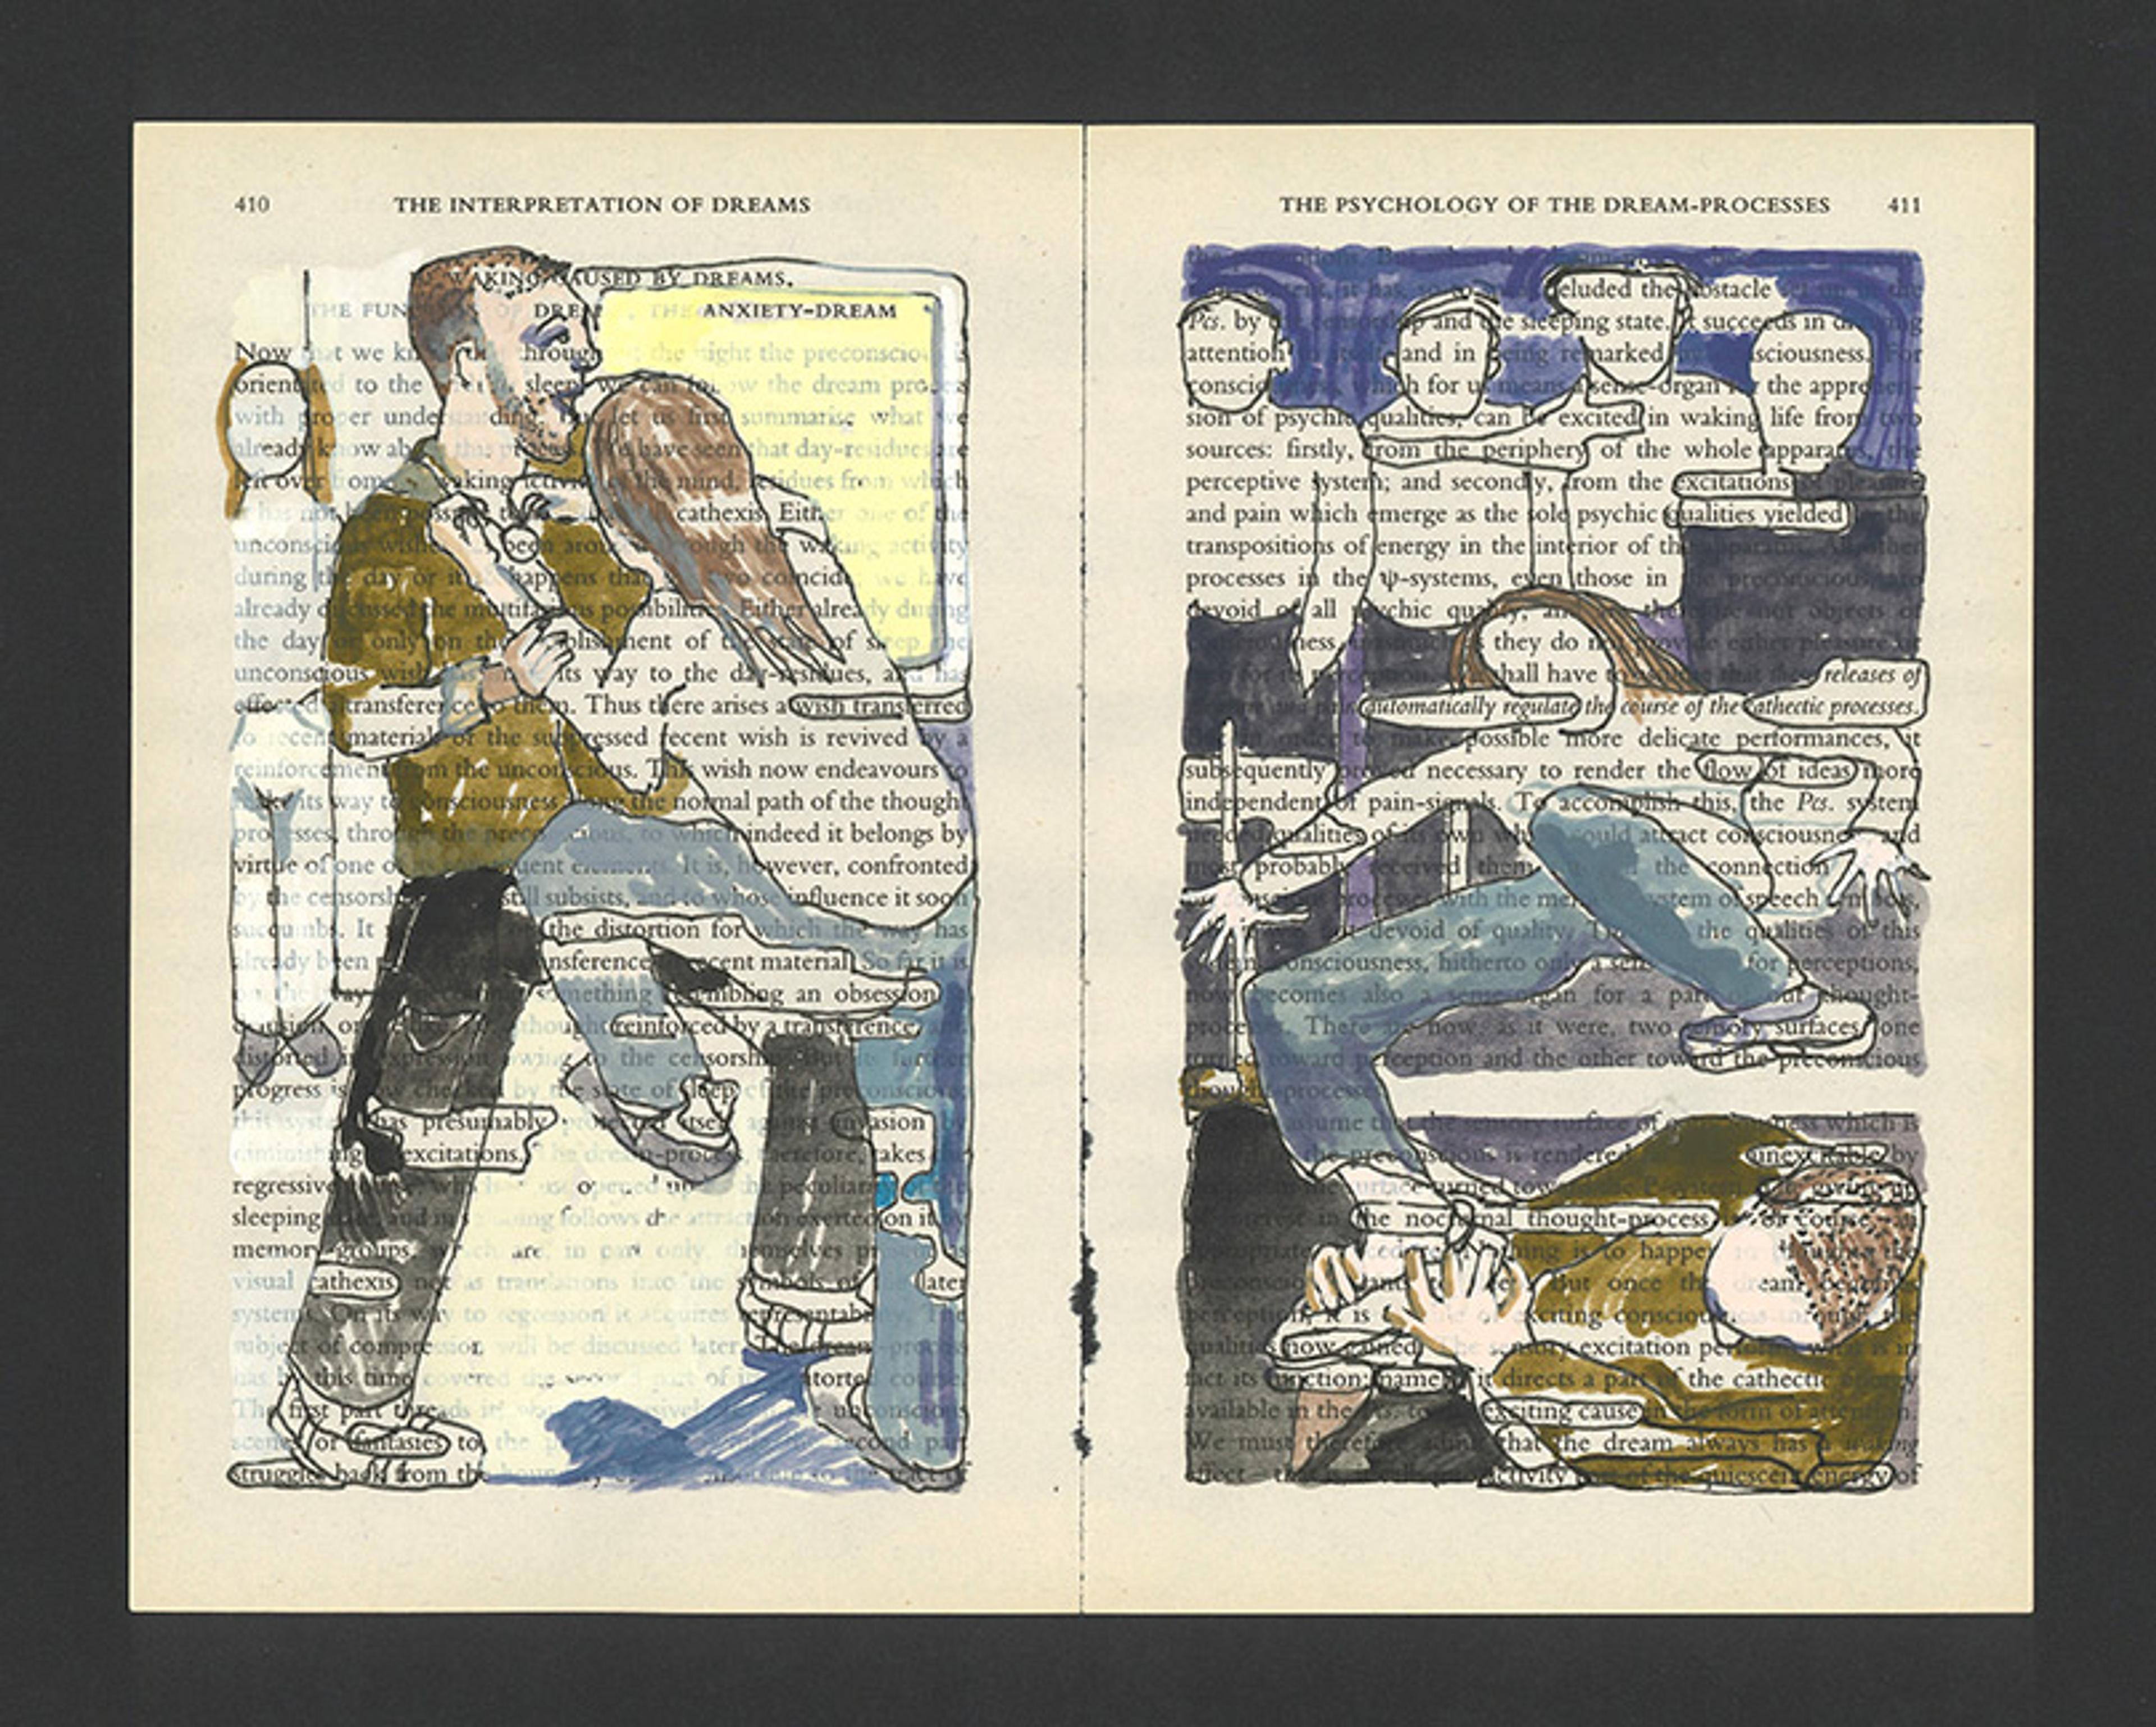 a woman fighting off a man is drawn on the left hand page of an open copy of Freud's book the Interpretation of dreams. On the right hand page the woman is kicking the man in the street in front of onlookers